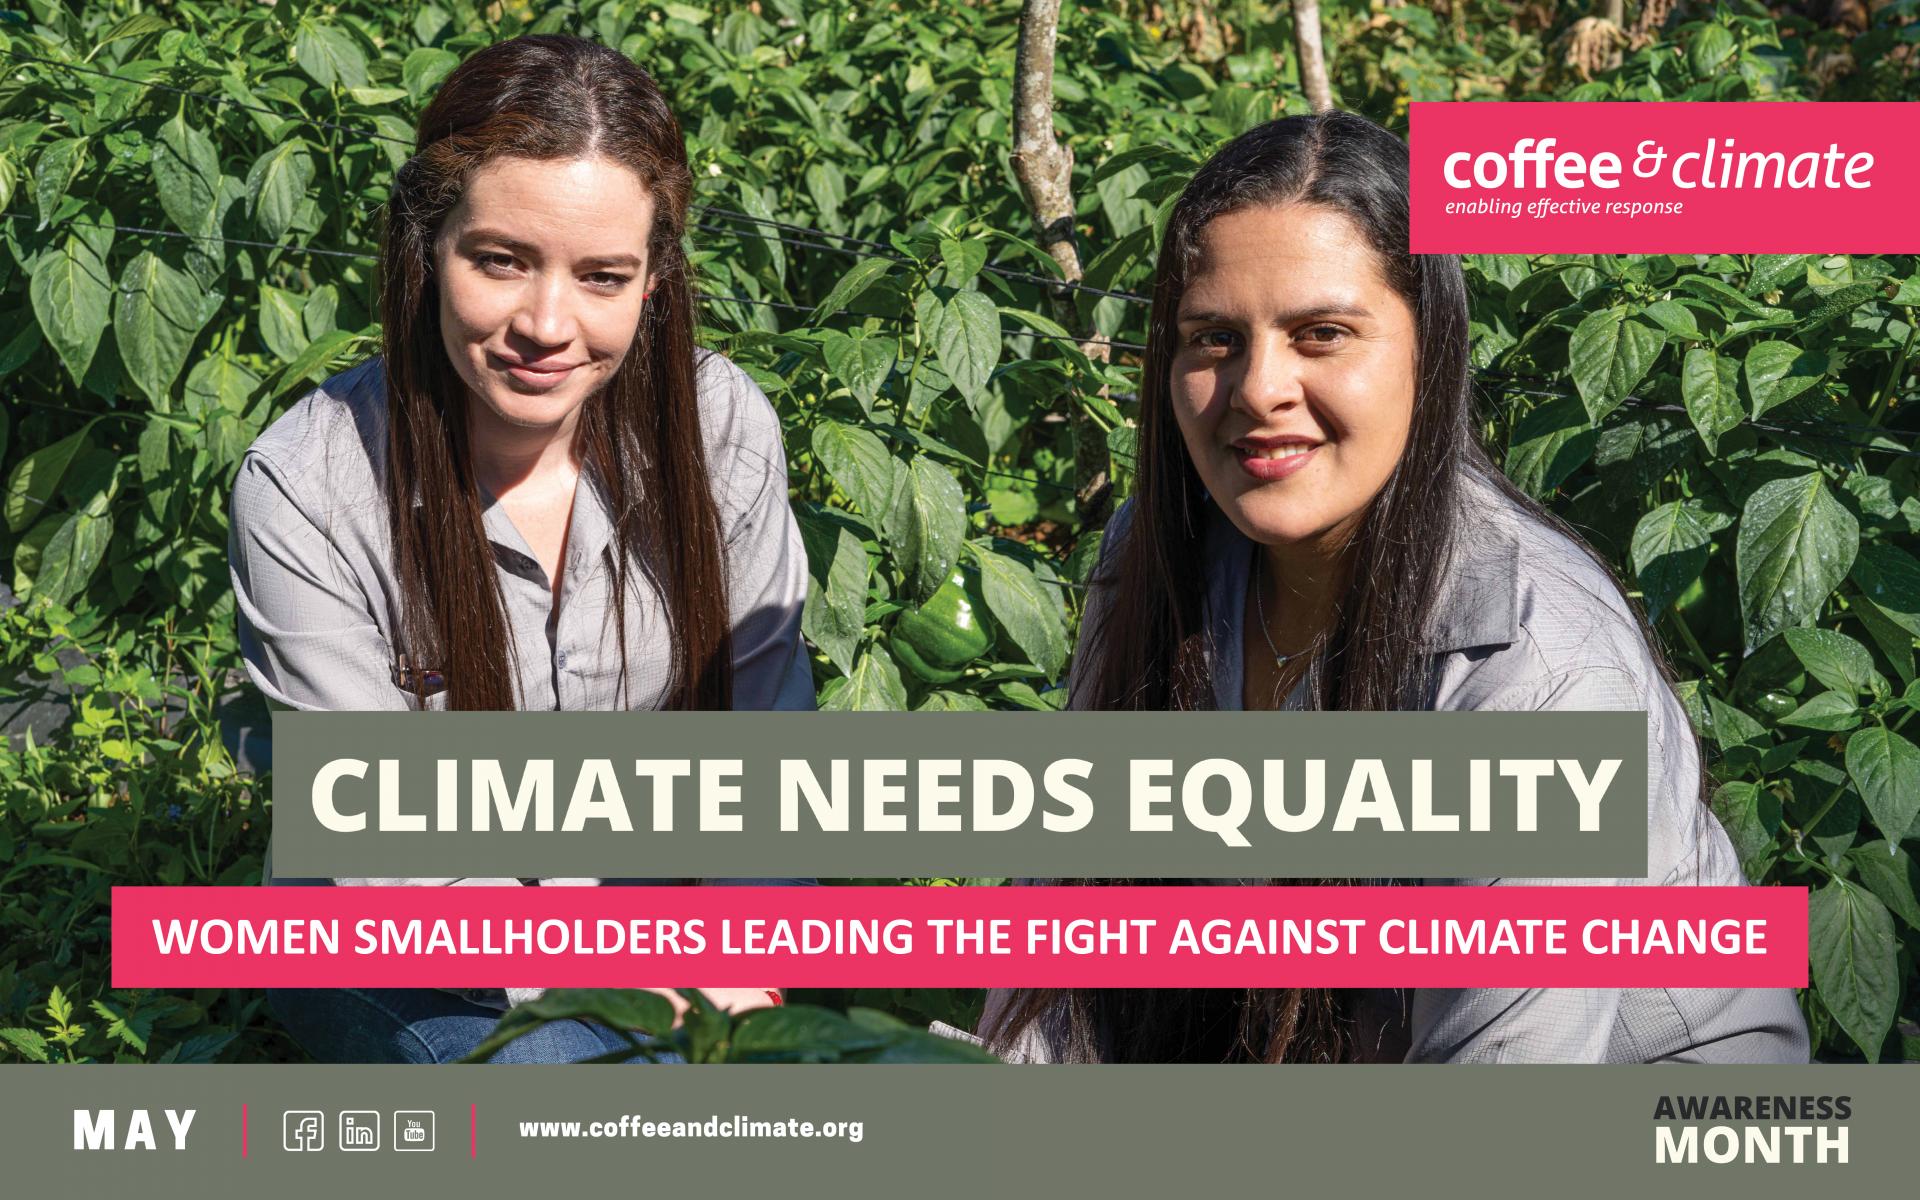 Women Smallholders Leading the Fight Against Climate Change